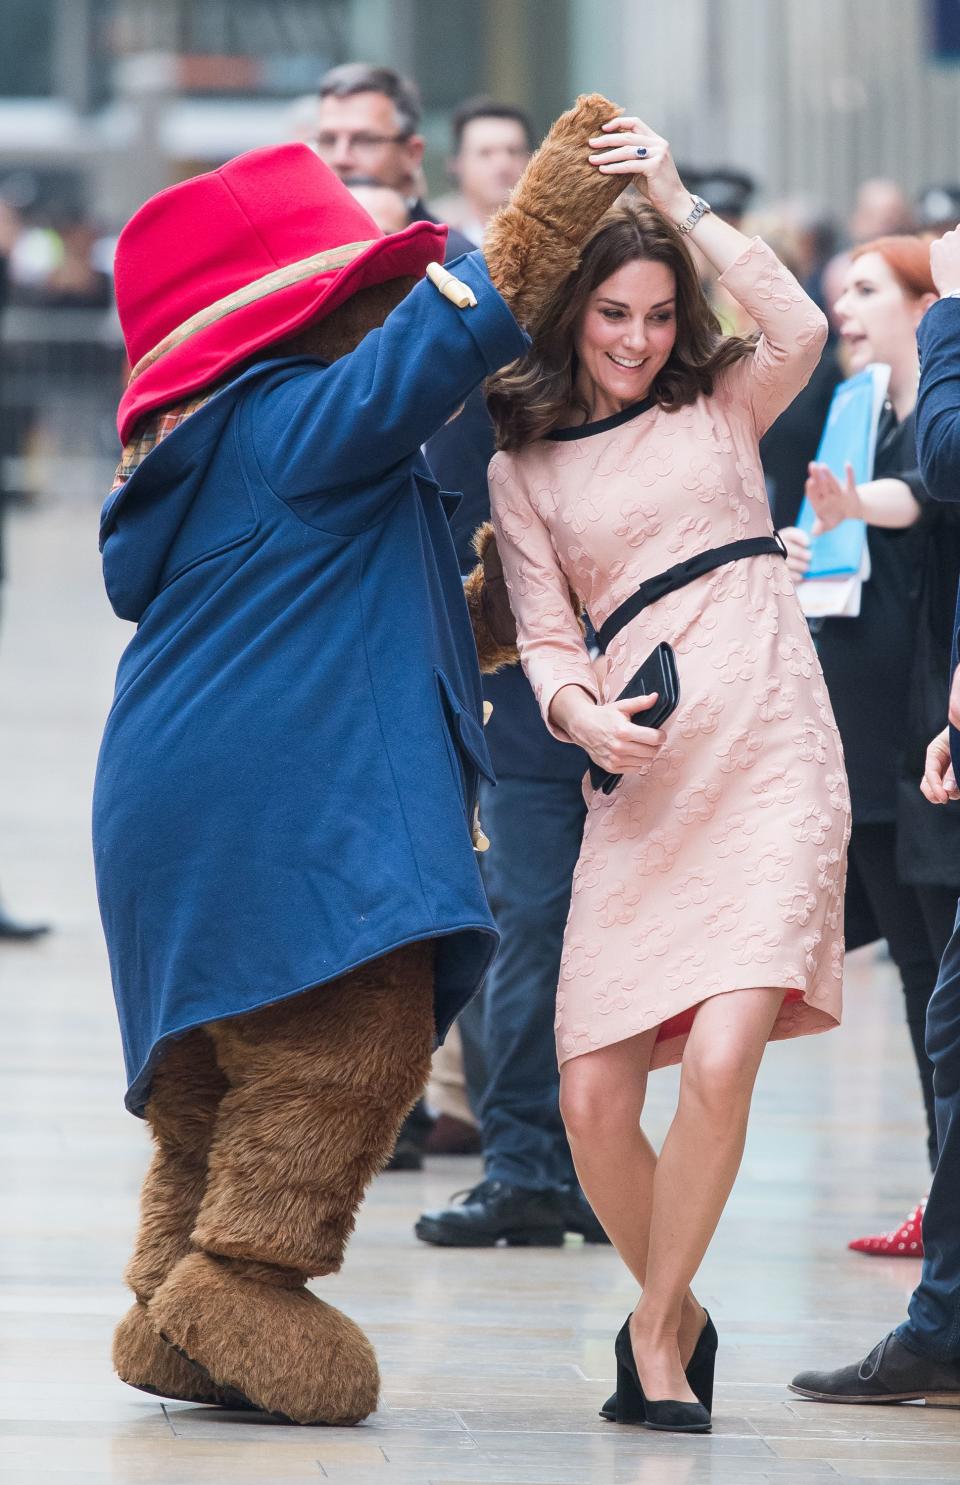 <p><strong>When: October 16, 2017</strong><br>Although the Duchess has been suffering from a severe form of morning sickness known as hyperemesis gravidarum, she was well enough to make this appearance alongside cast members of the movie ‘Paddington 2’. Rocking slightly shorter hair styled into glossy curls, Kate even danced with Paddington Bear himself!<br><em>[Photo: Getty]</em> </p>